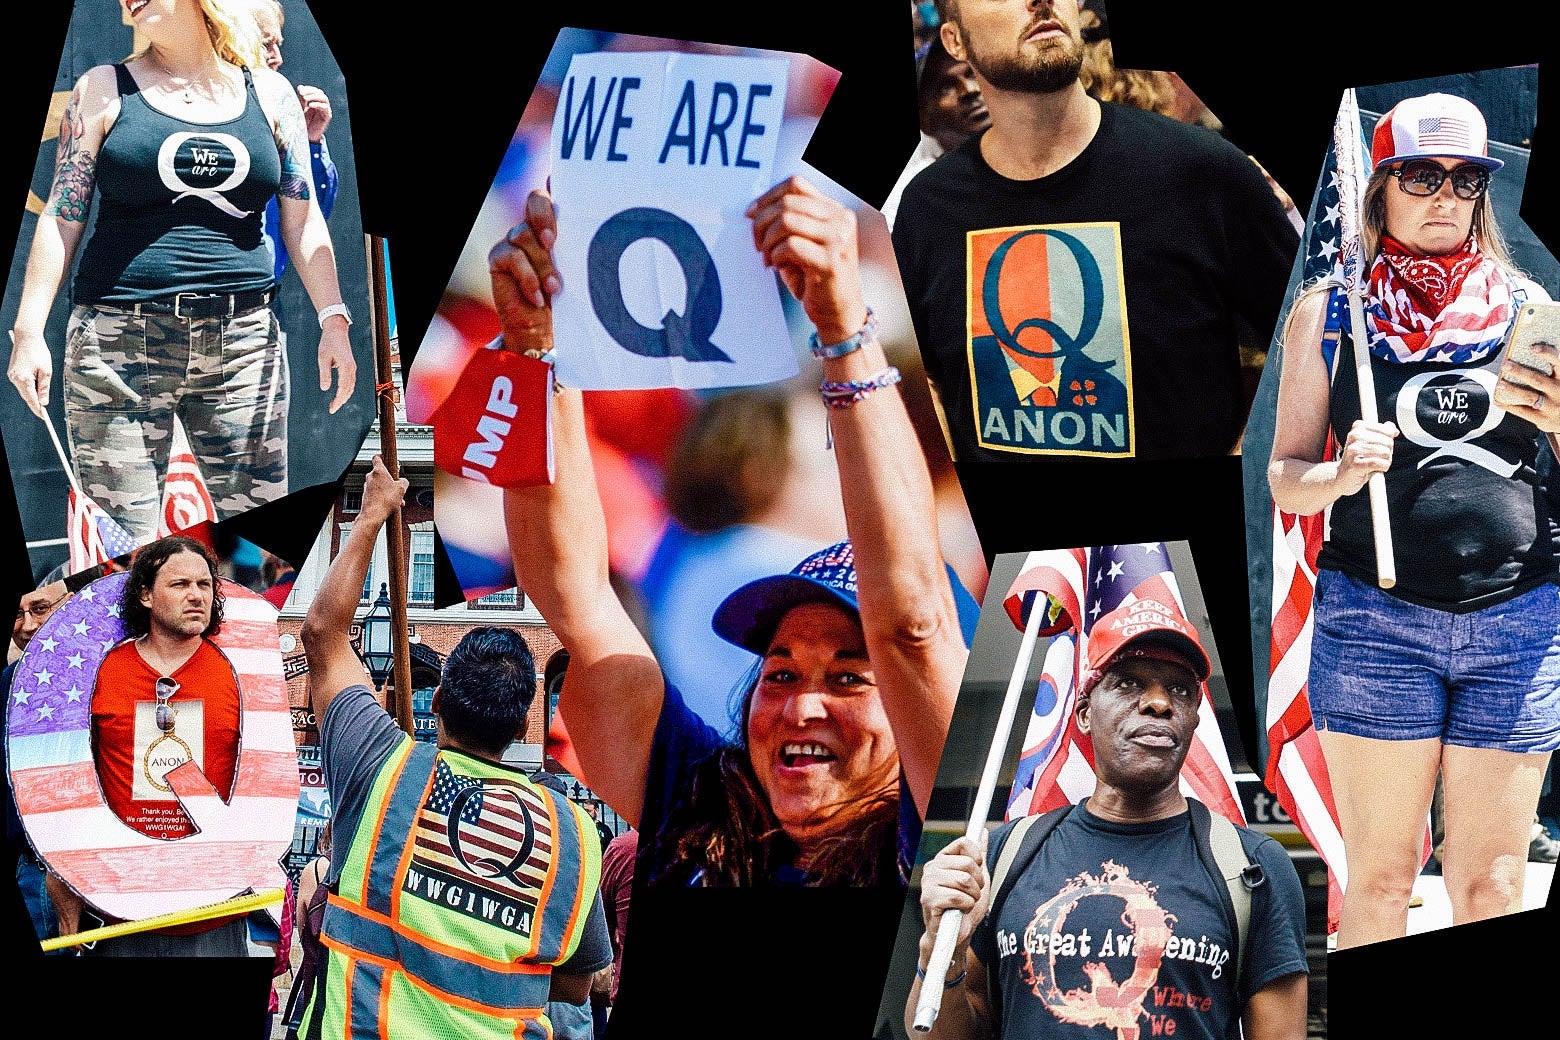 Photo collage of QAnon supporters wearing Q clothing.